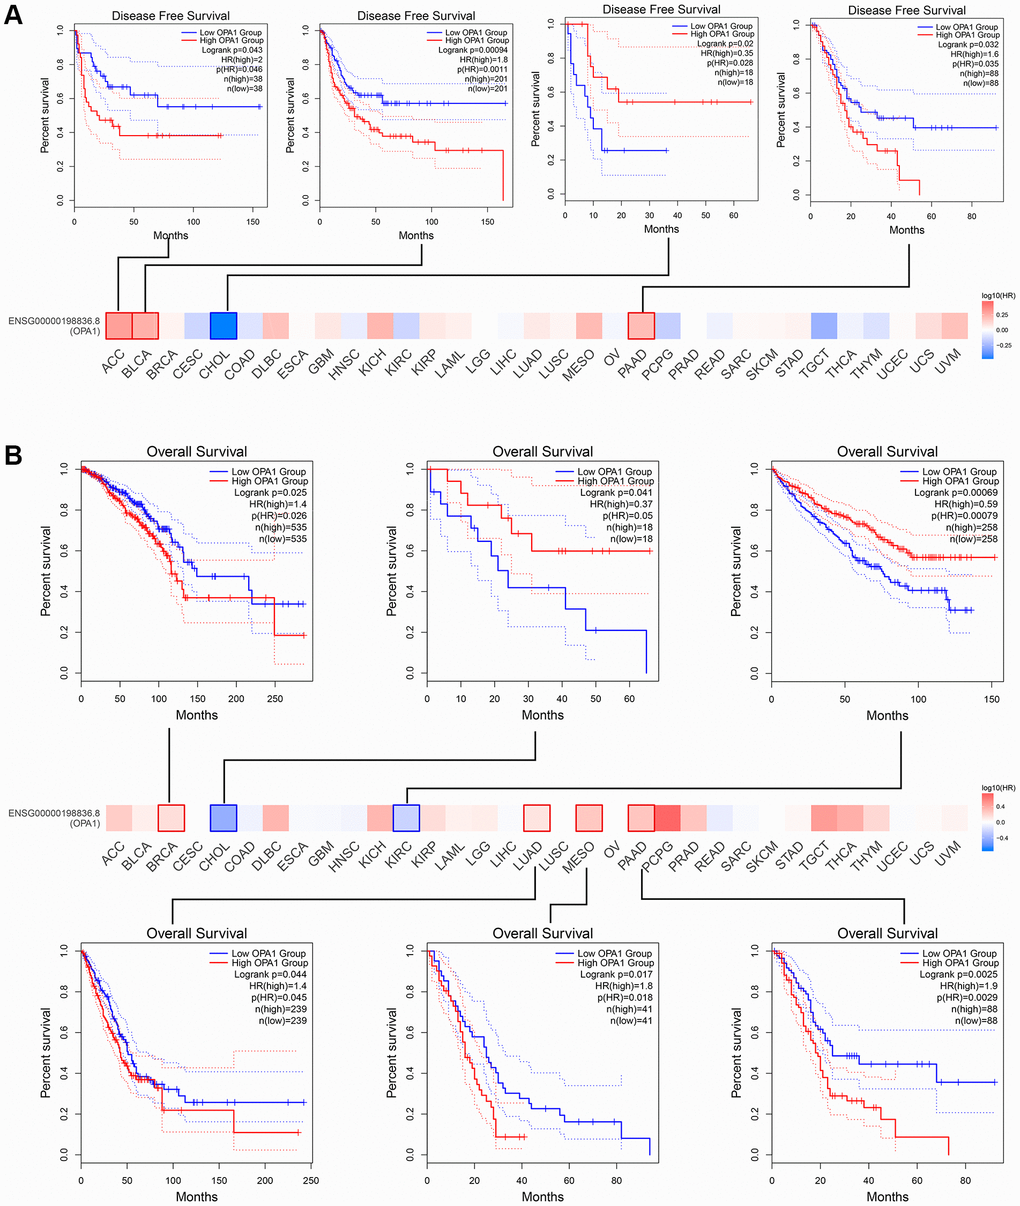 The prognosis comparison of tumor patients in the OPA1 high expression group and the low expression group, analyzed by GEPIA. (A) Disease-free survival and (B) overall survival.